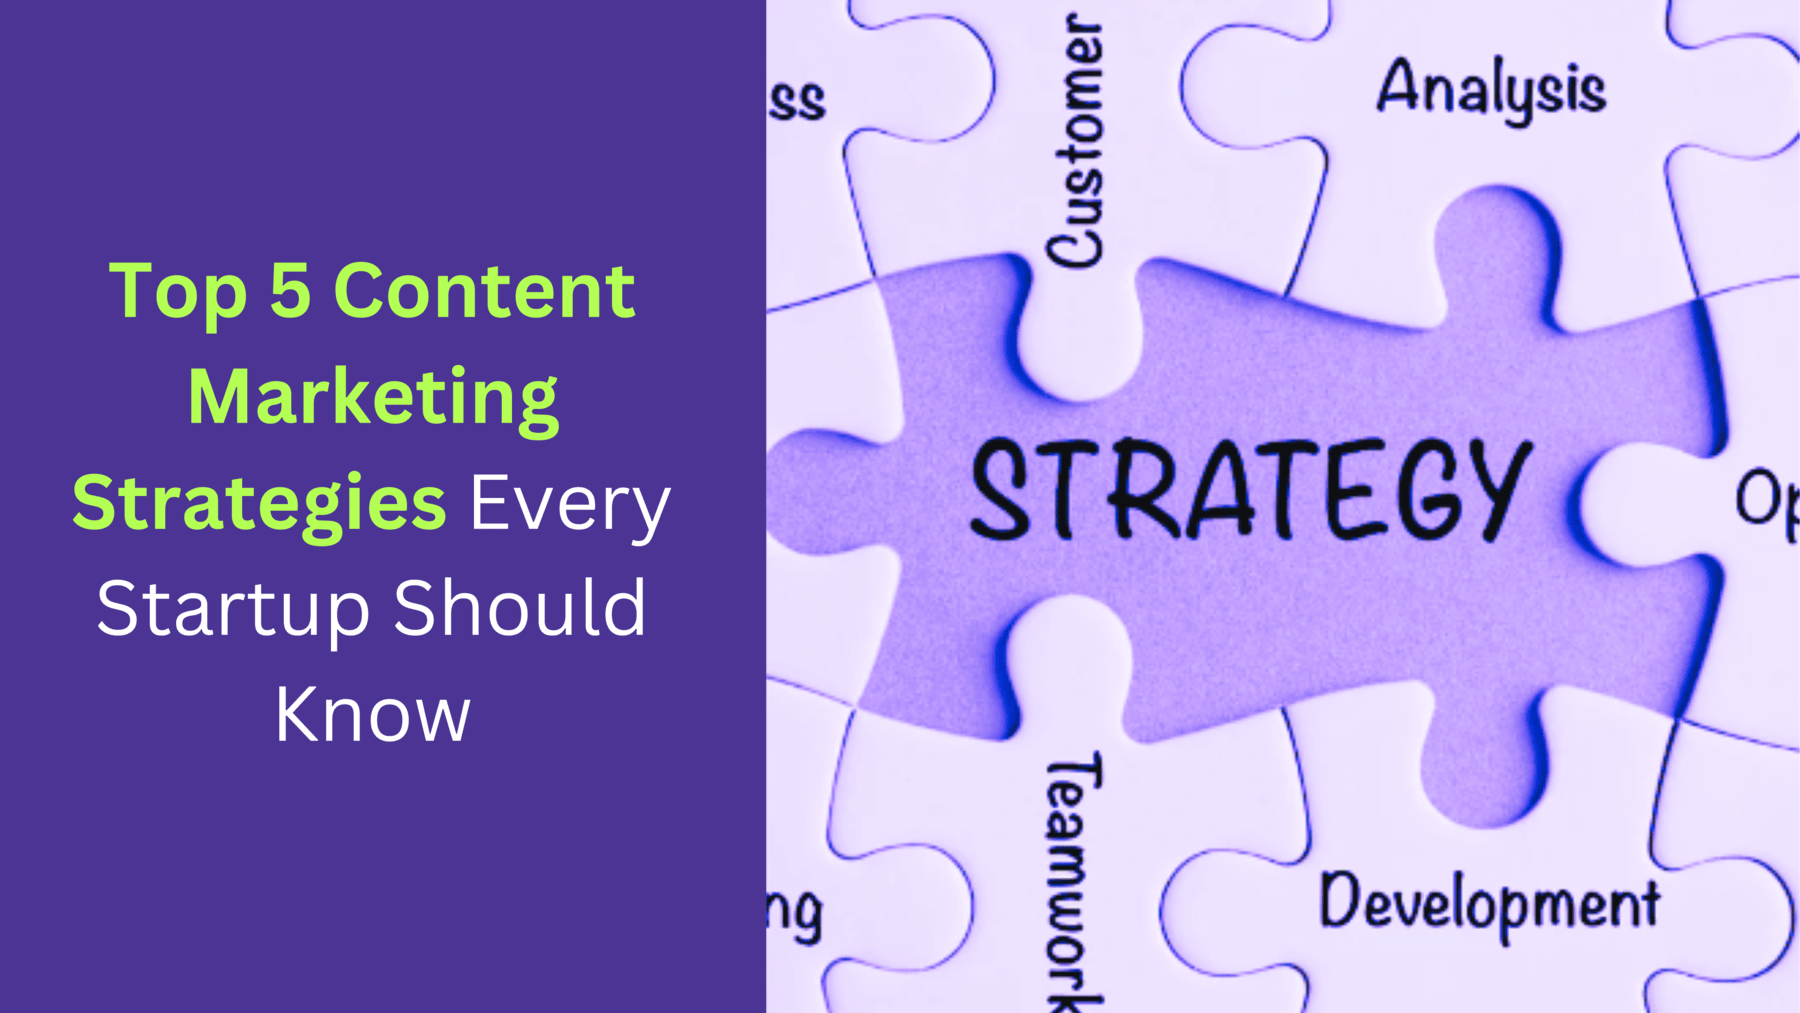 Top 5 Content Marketing Strategies Every Startup Should Know